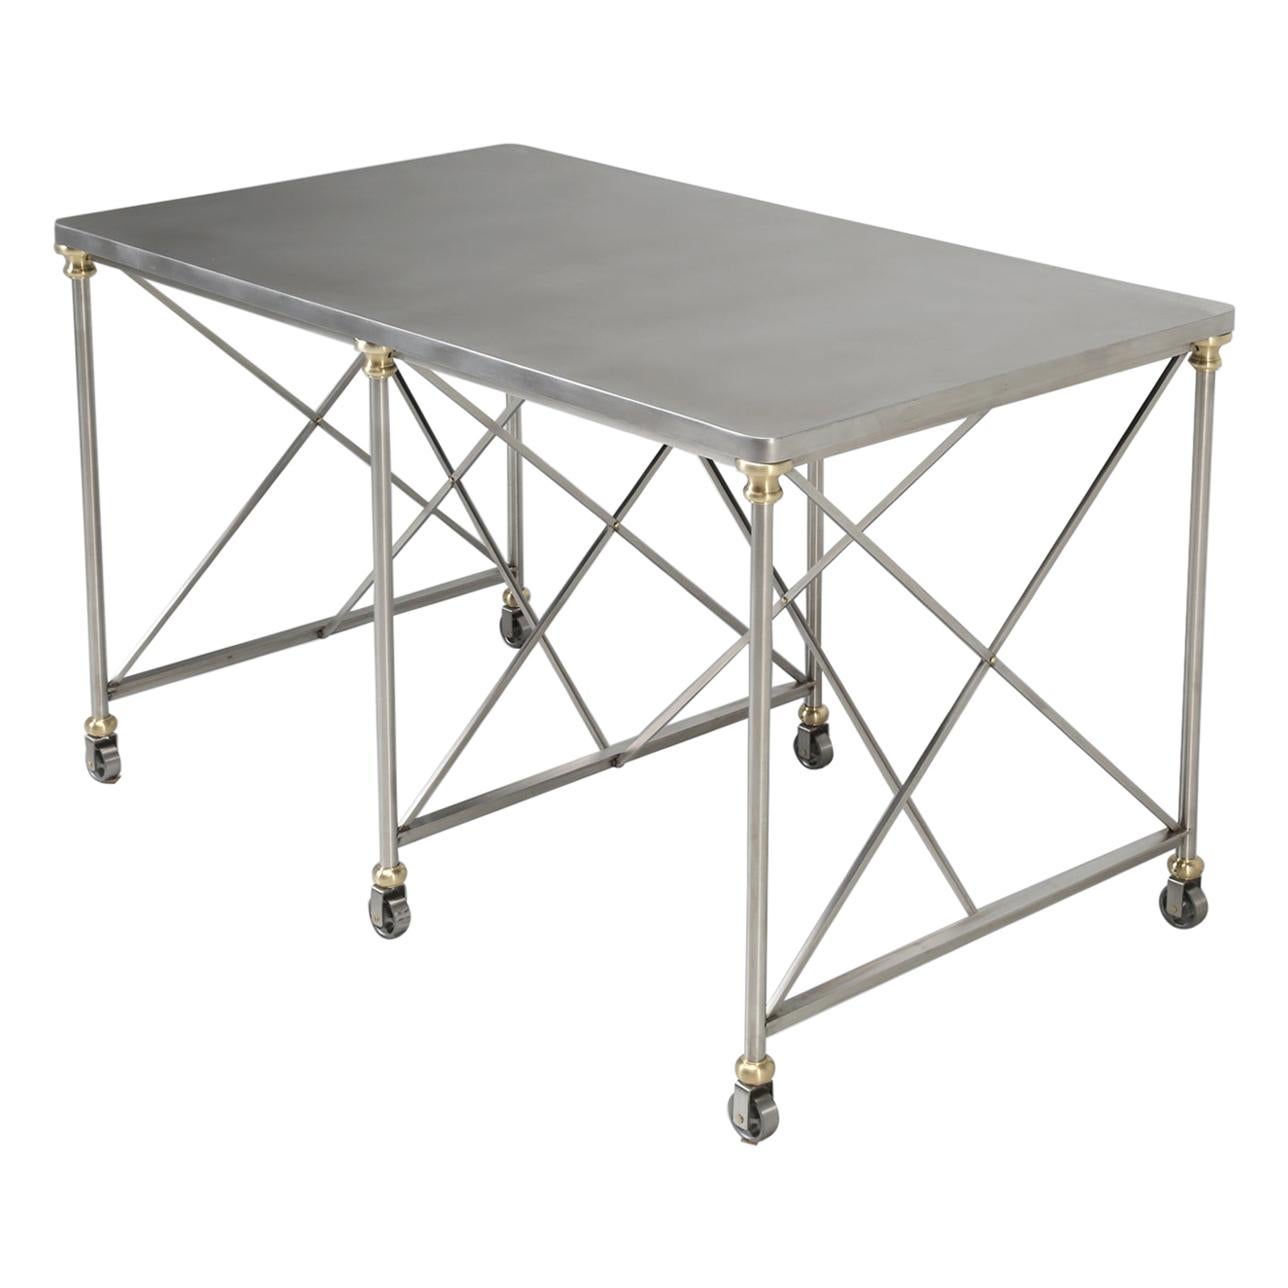 French Industrial Style Kitchen Island Made from Stainless Steel and Brass